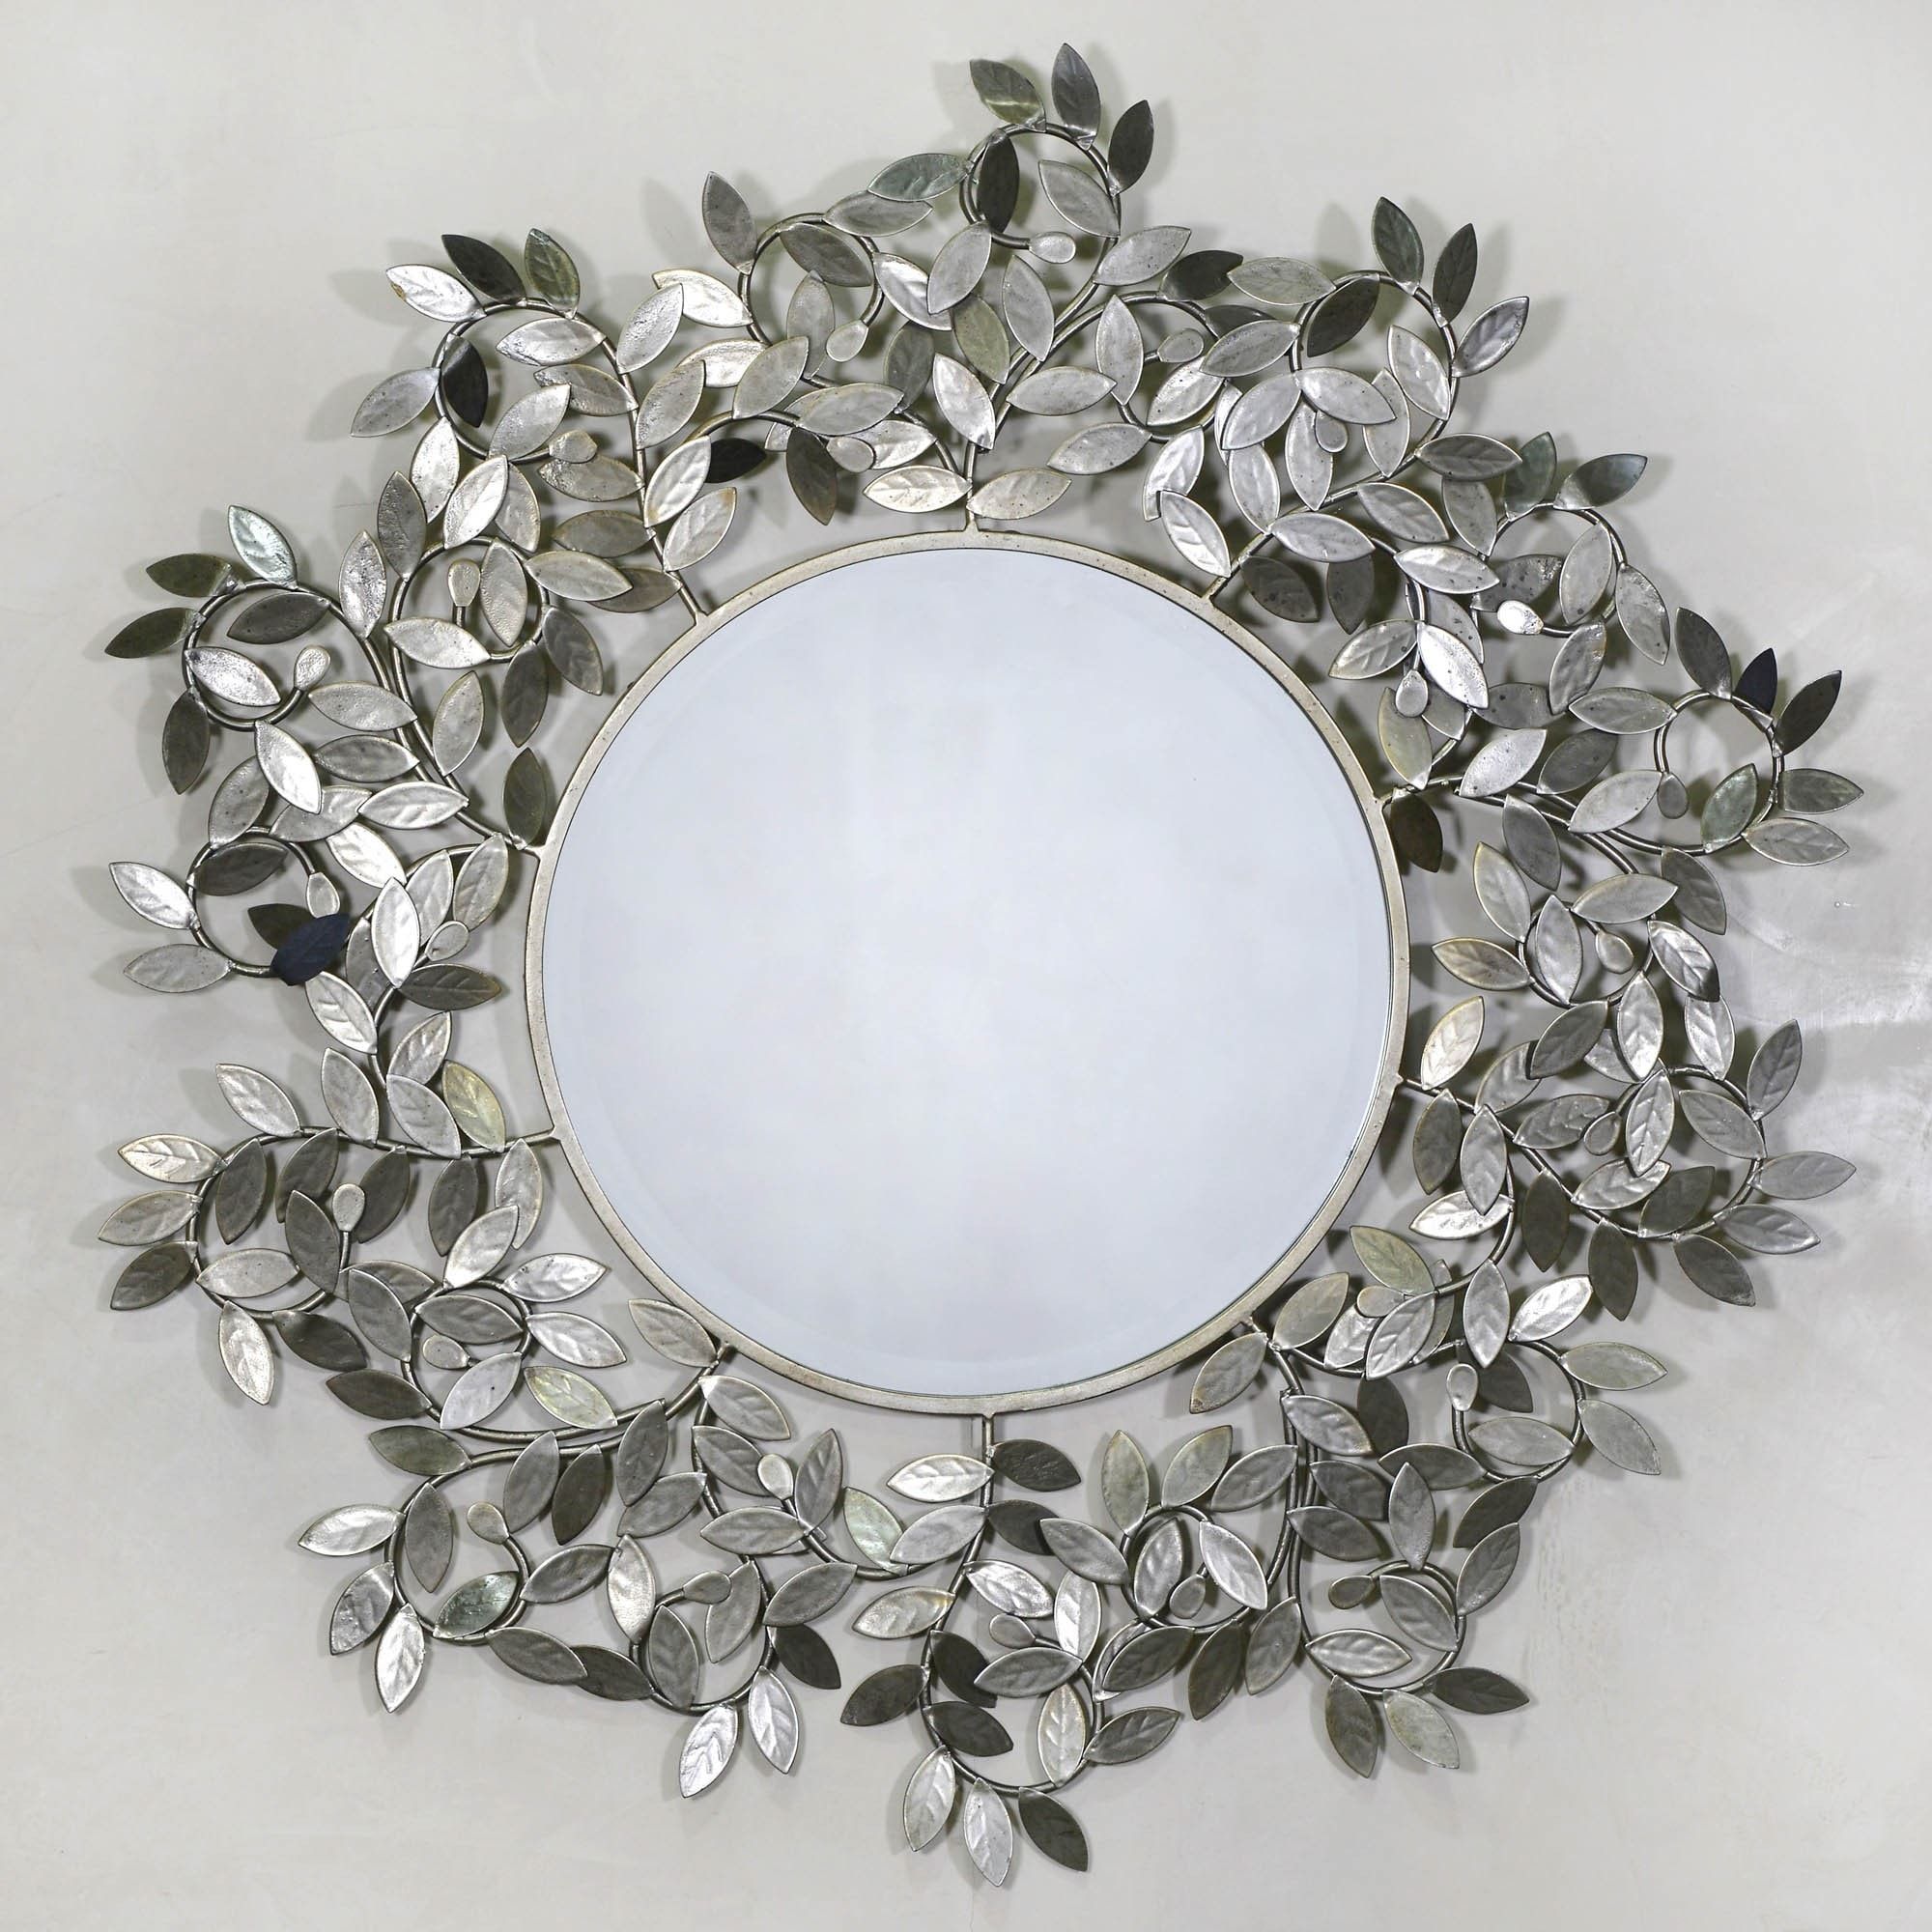 Antique Silver Rose Leaf Metal Framed Wall Mirror | Contemporary Mirror Intended For Brass Iron Framed Wall Mirrors (View 7 of 15)